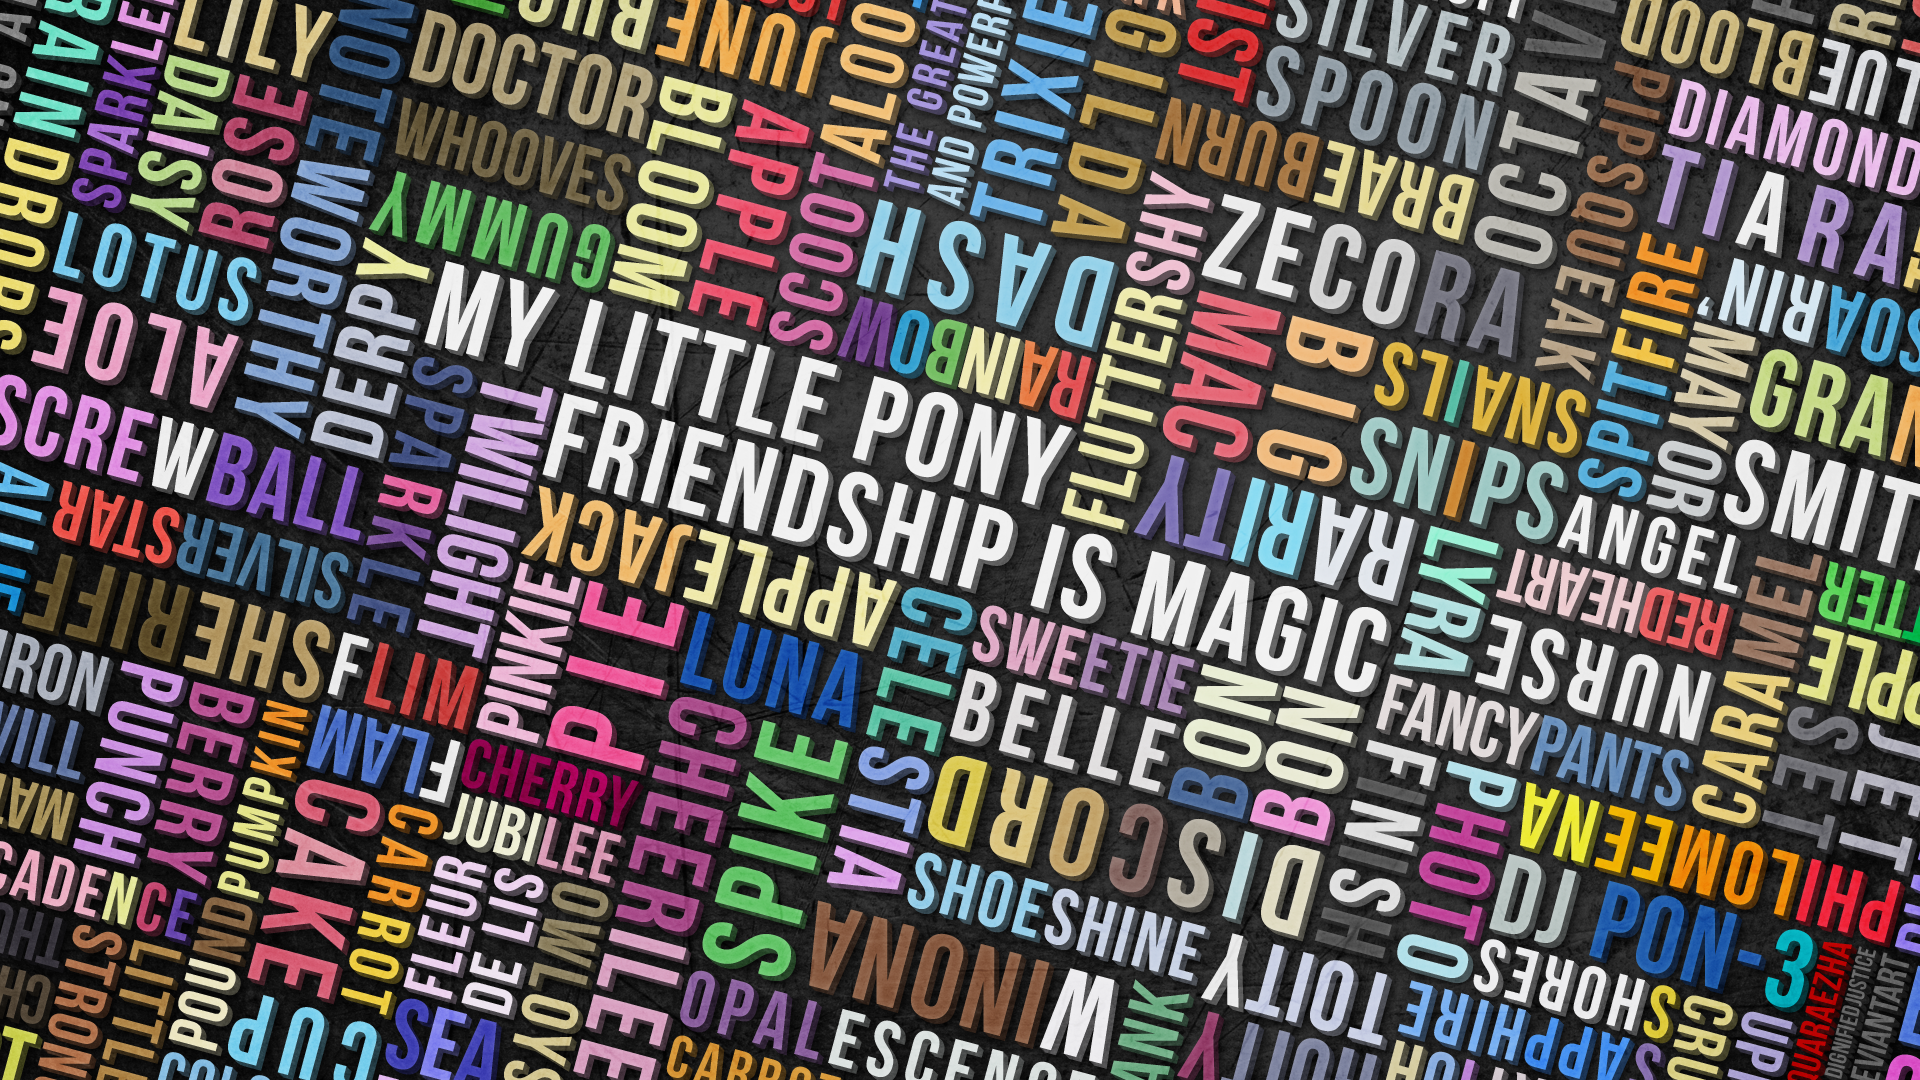 Typography Wallpaper Google Search Typography Wallpaper My Little Pony My Little Pony Pictures